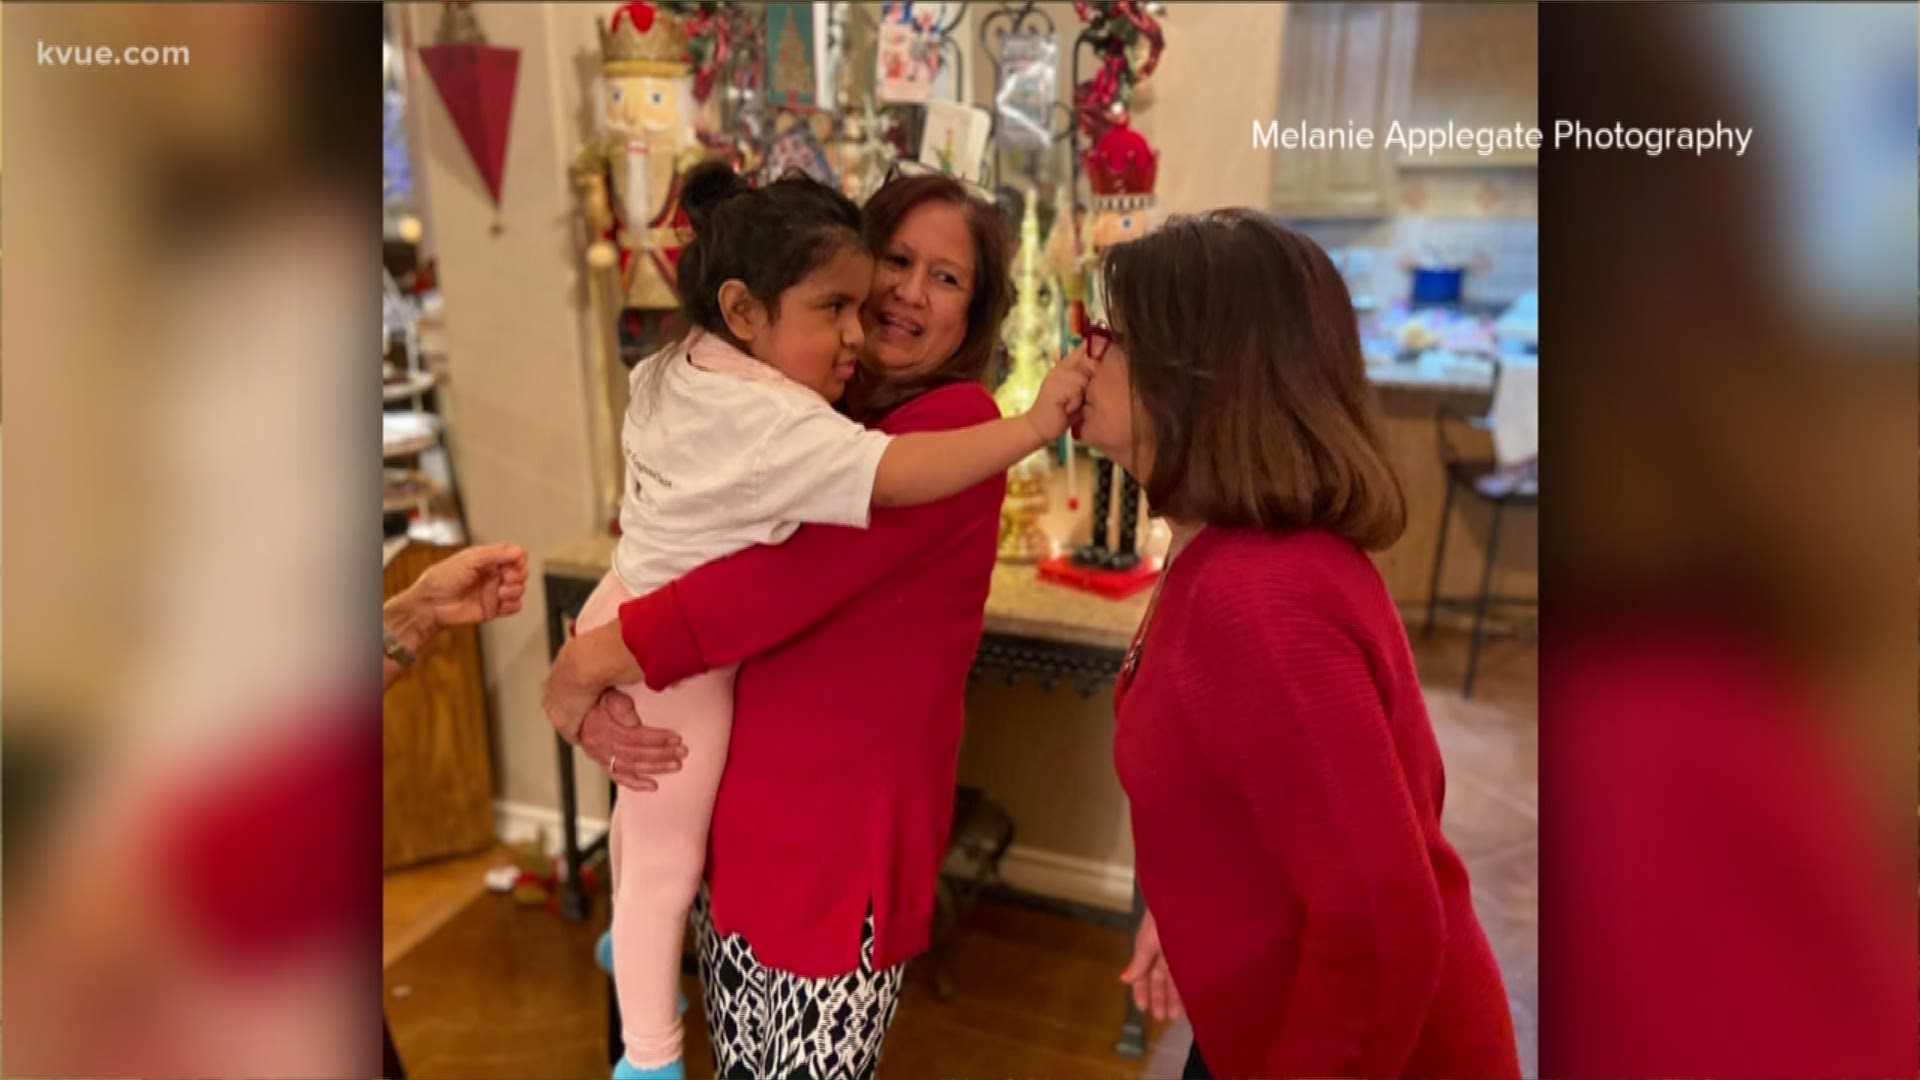 Her story reached thousands of people. Now her parents told KVUE her story is just getting started.